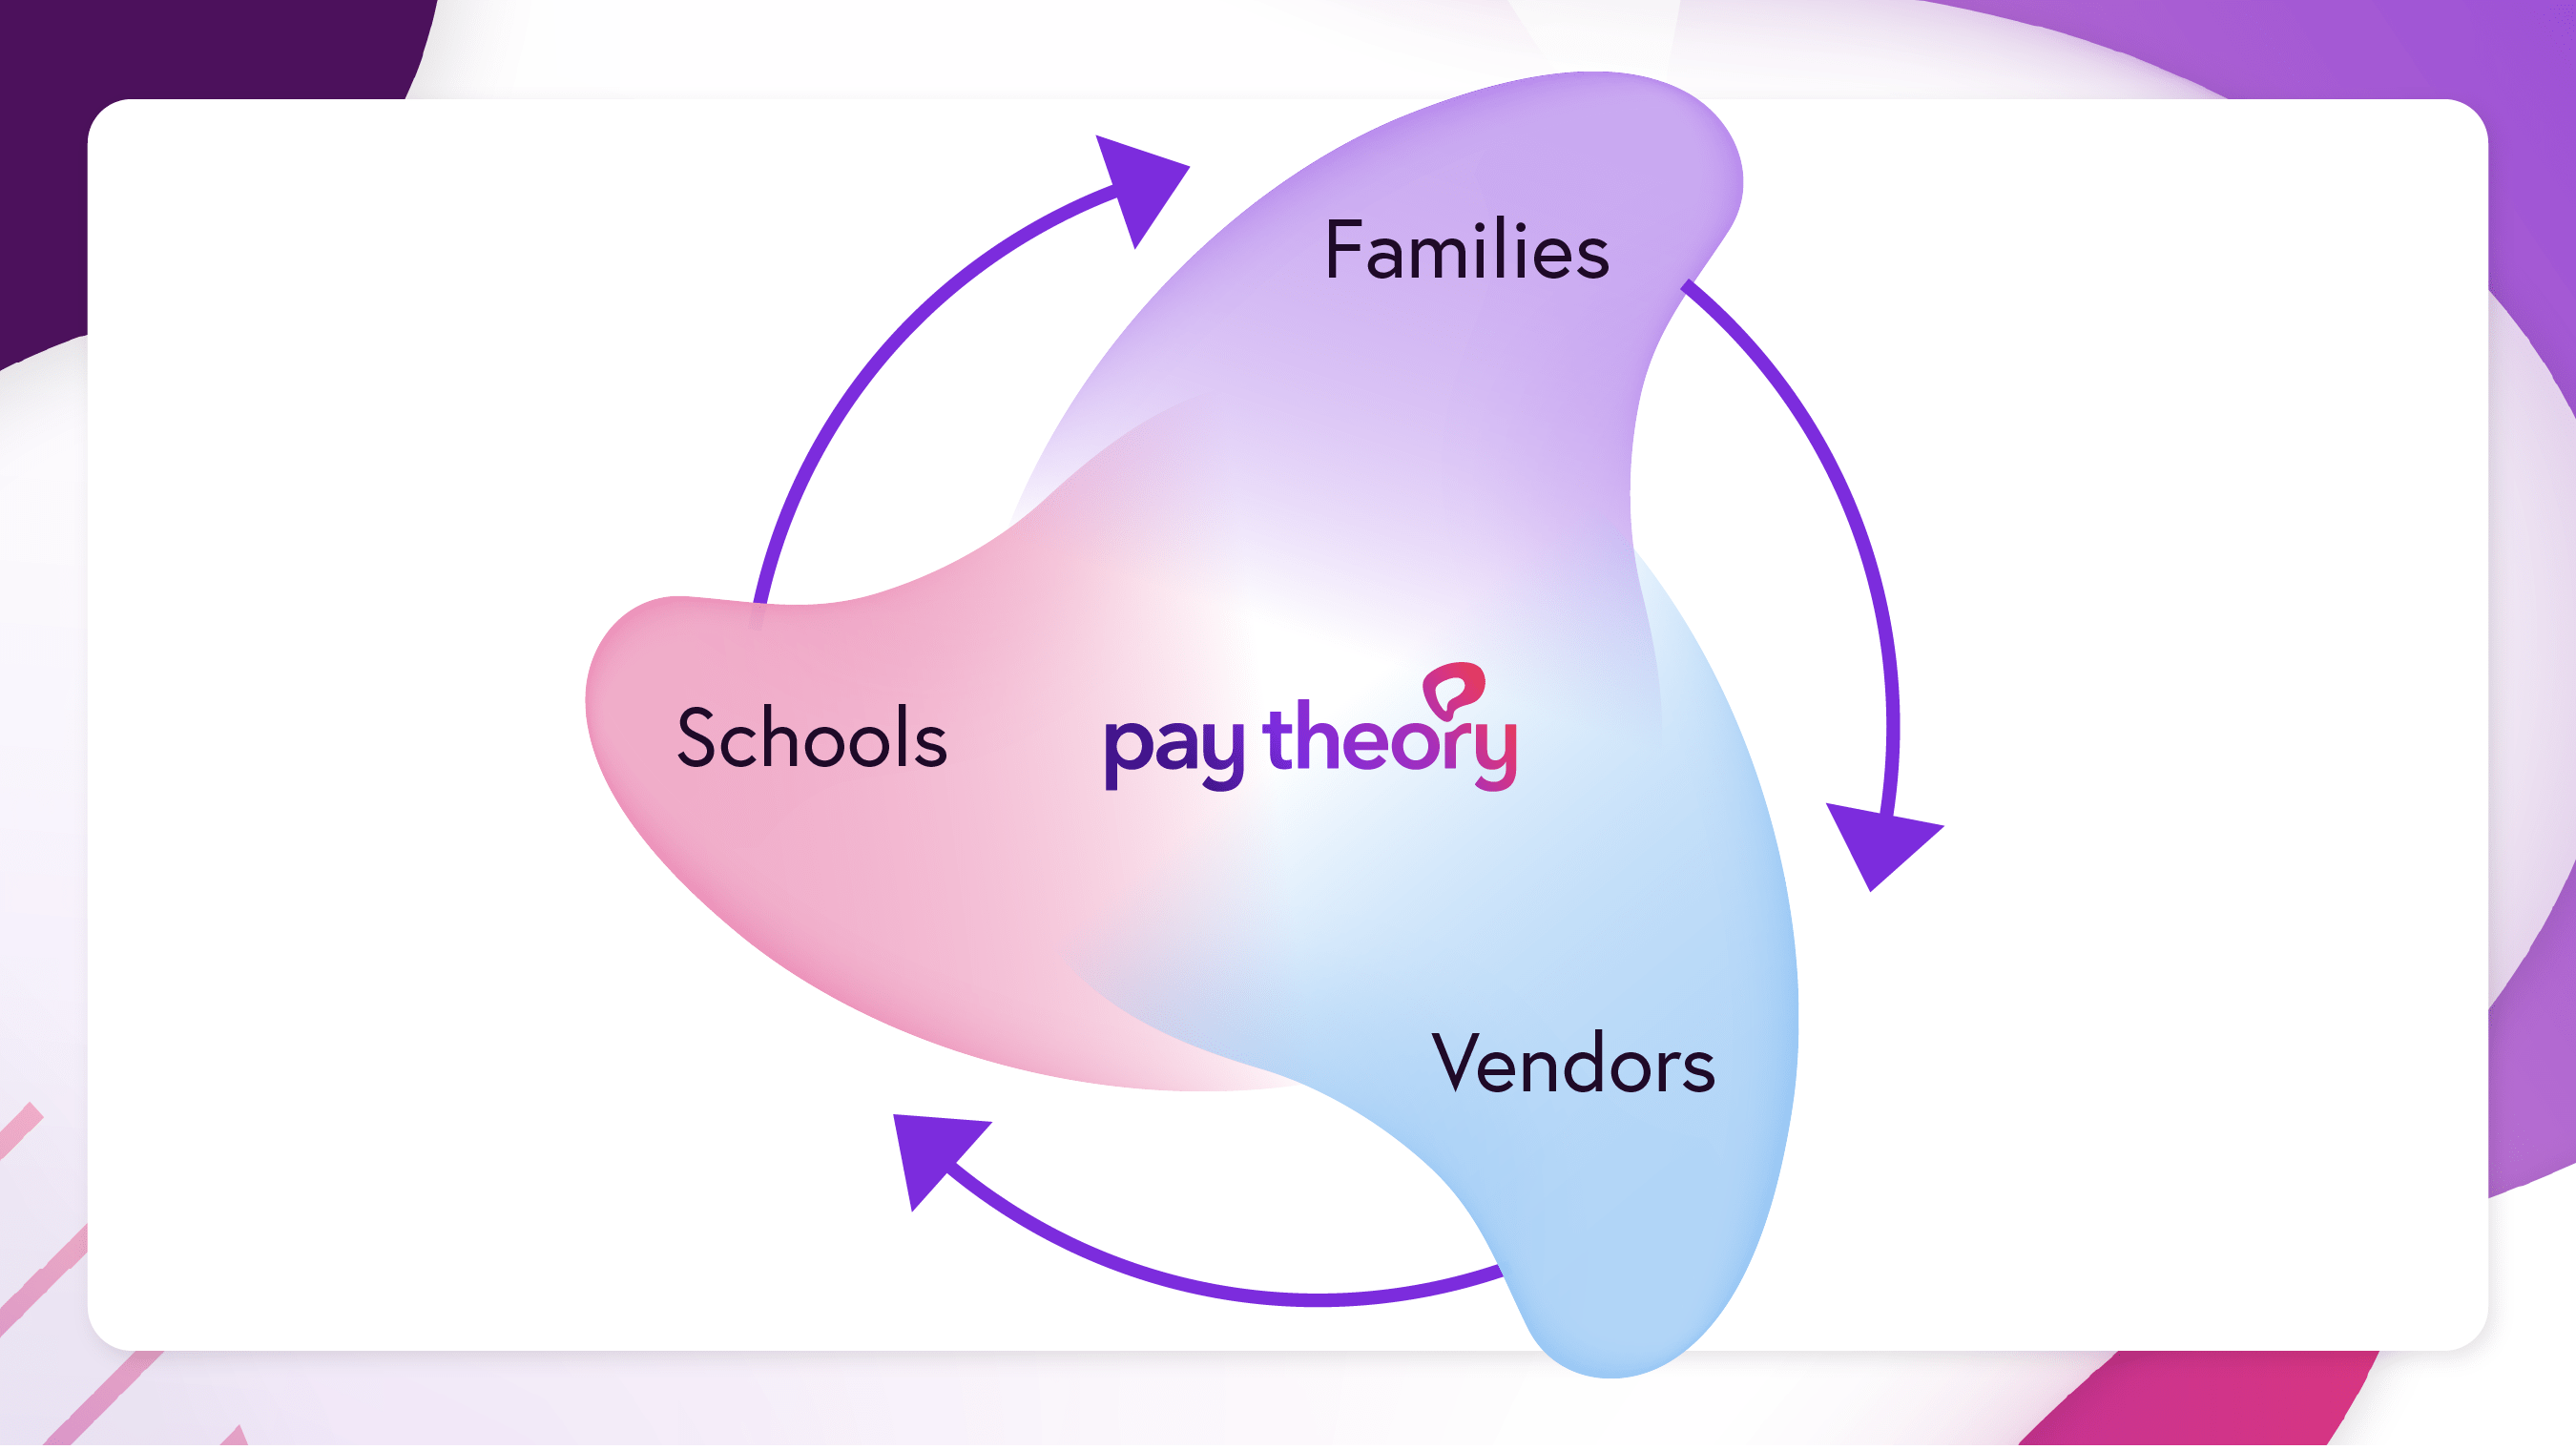 About Pay Theory